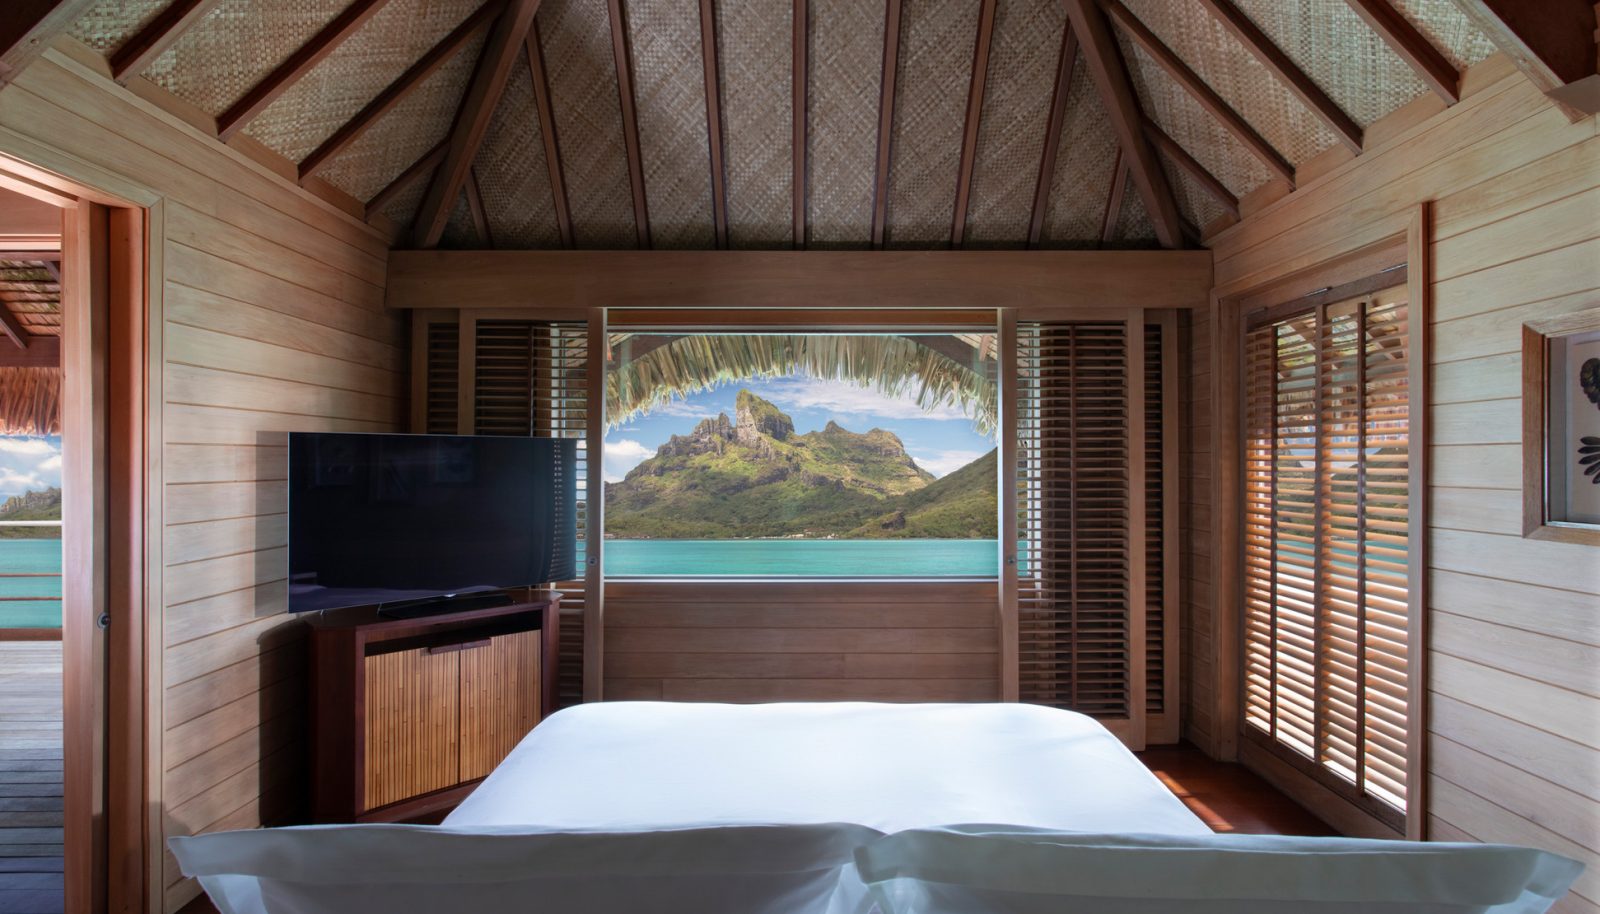 View from an Overwater Bungalow at the Four Seasons Resort Bora Bora